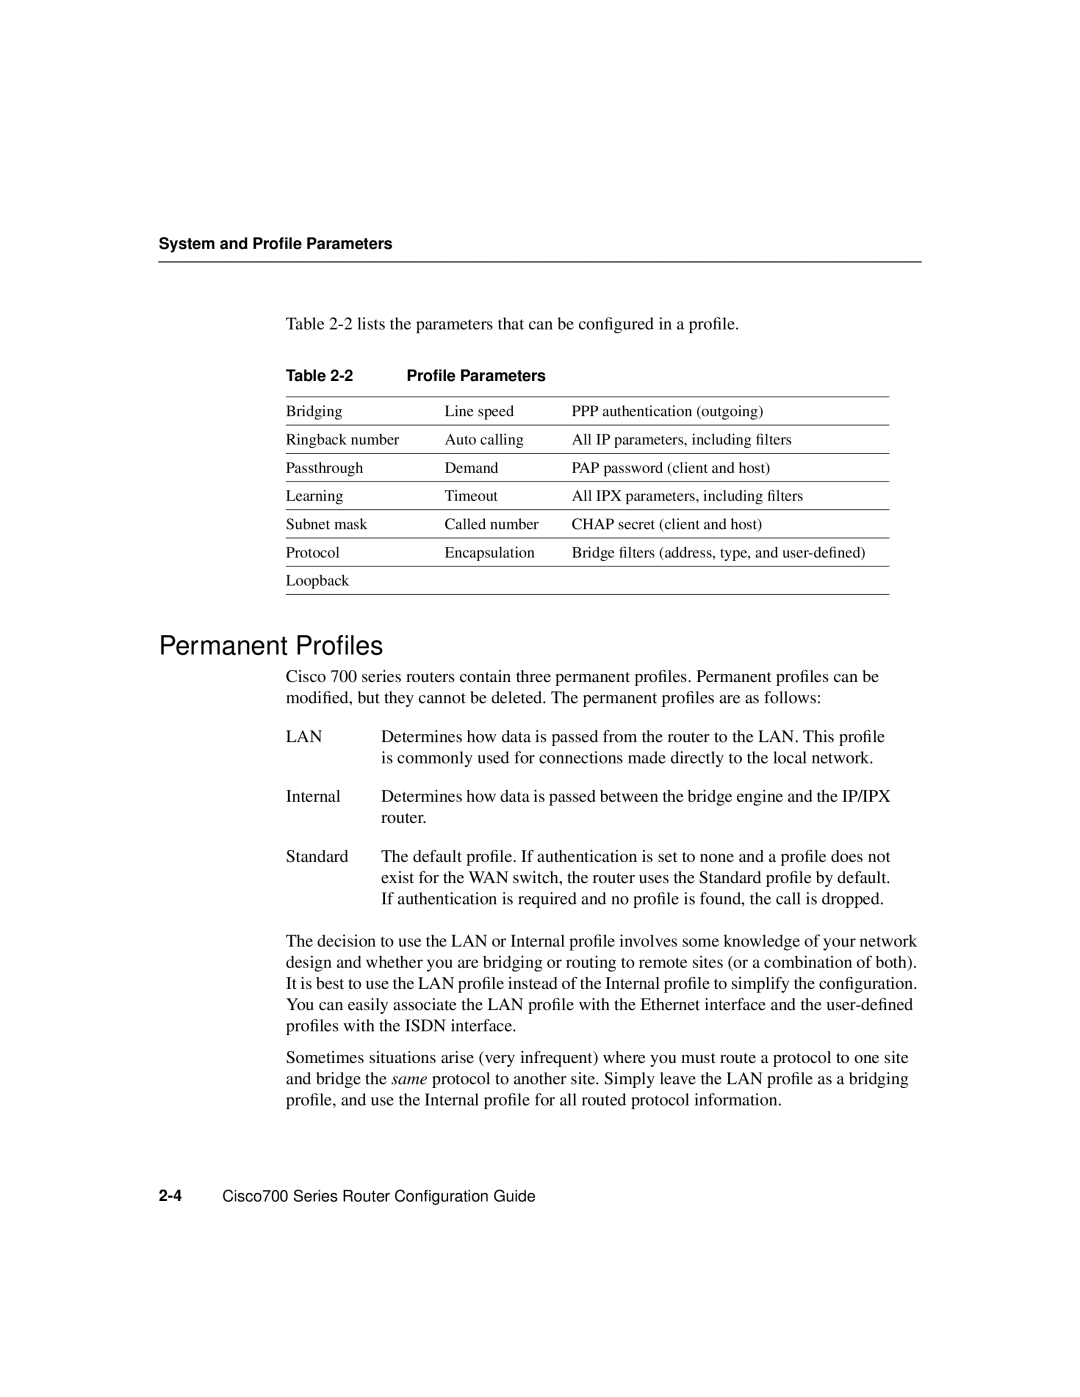 Cisco Systems 700 manual Permanent Proﬁles 